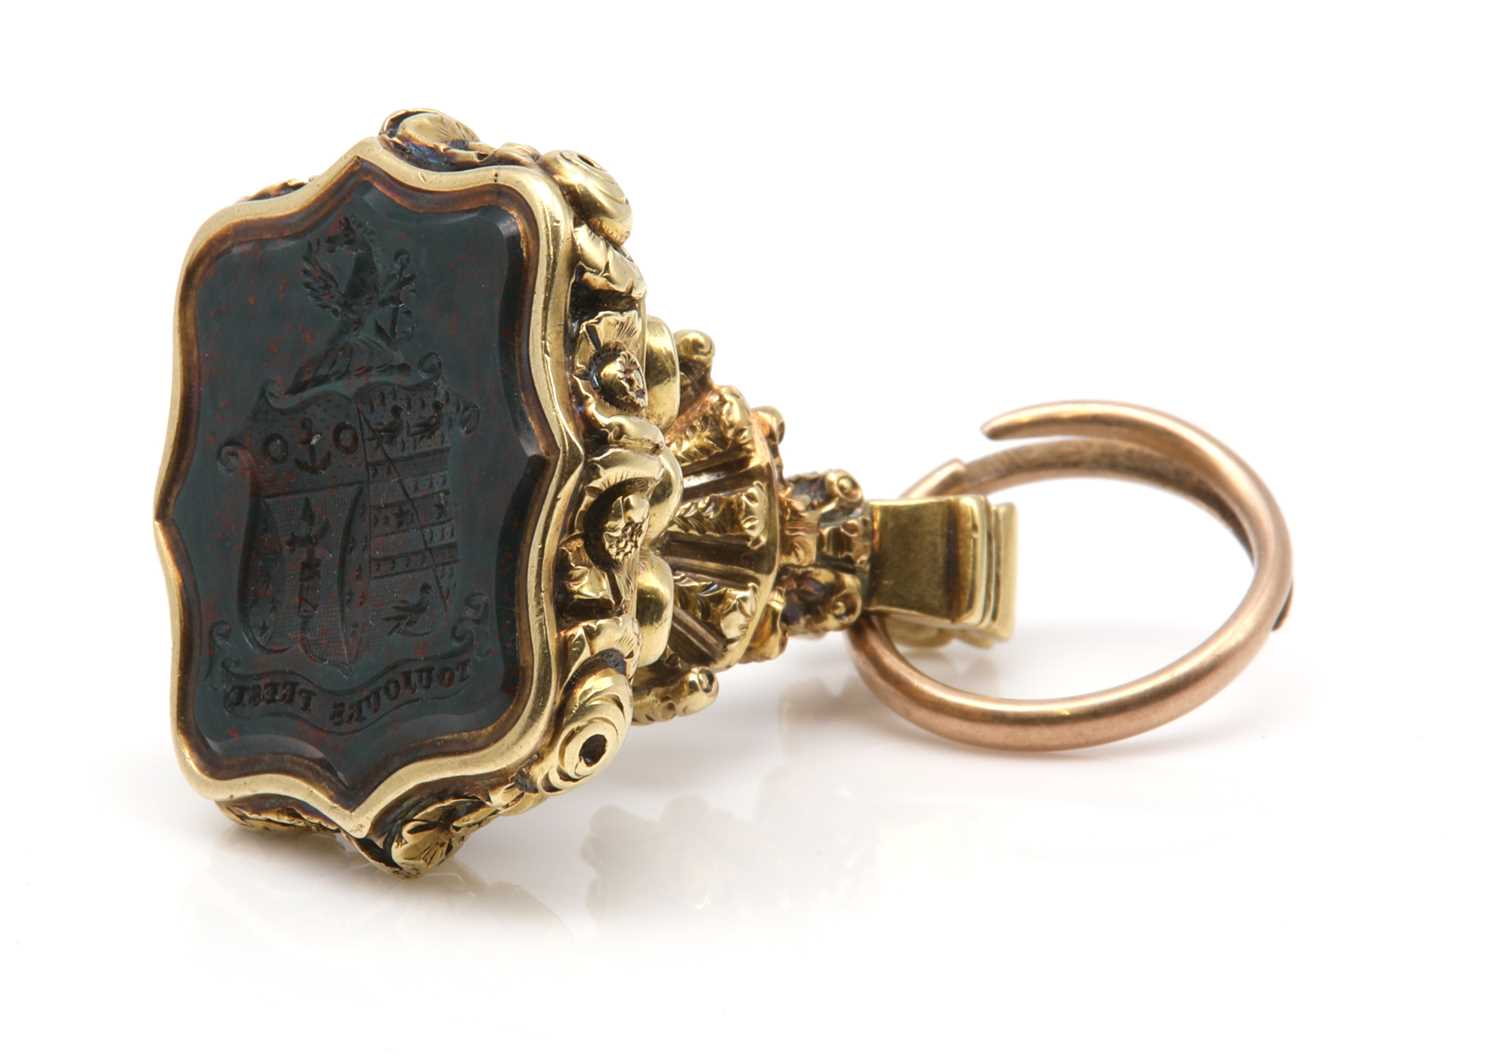 Lot 81 - A chased bloodstone seal fob, c.1840